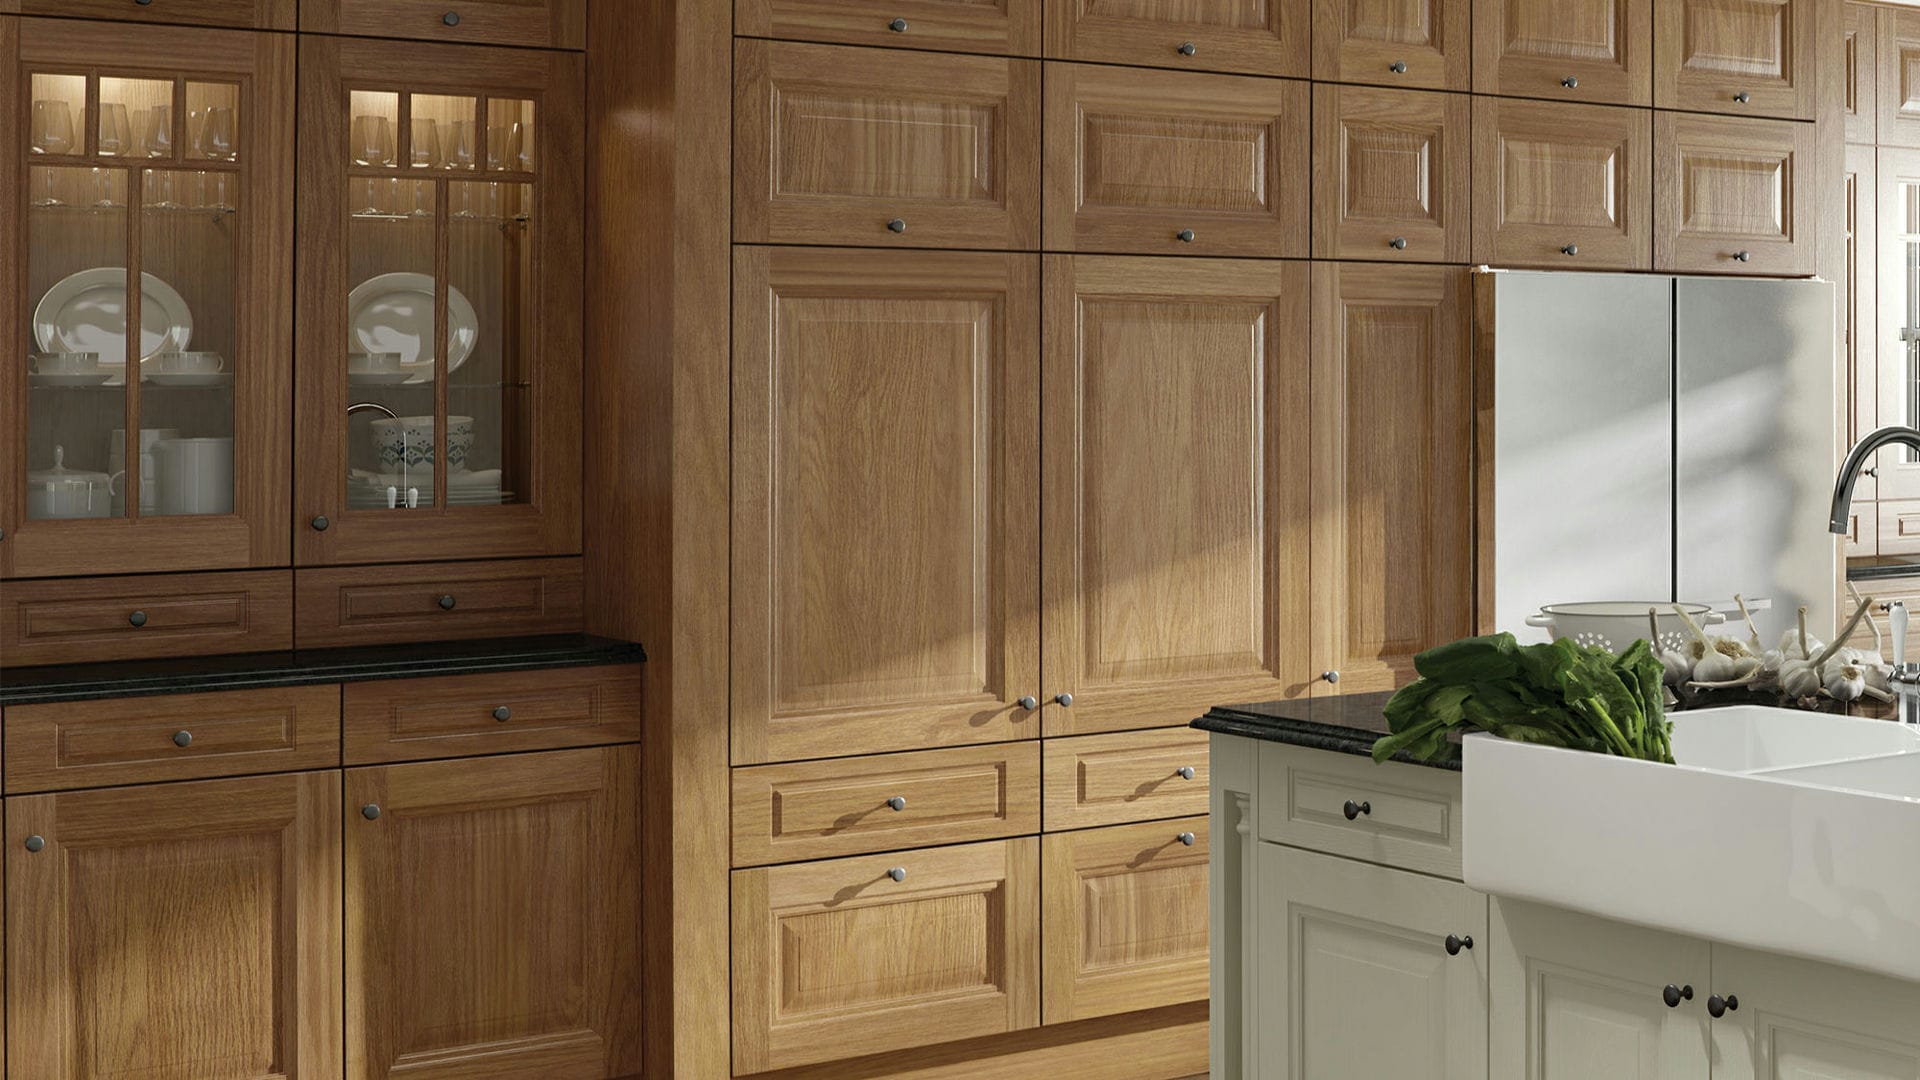 Solid wood Jefferson oak kitchens combining durable oak construction with a timeless design for classic appeal